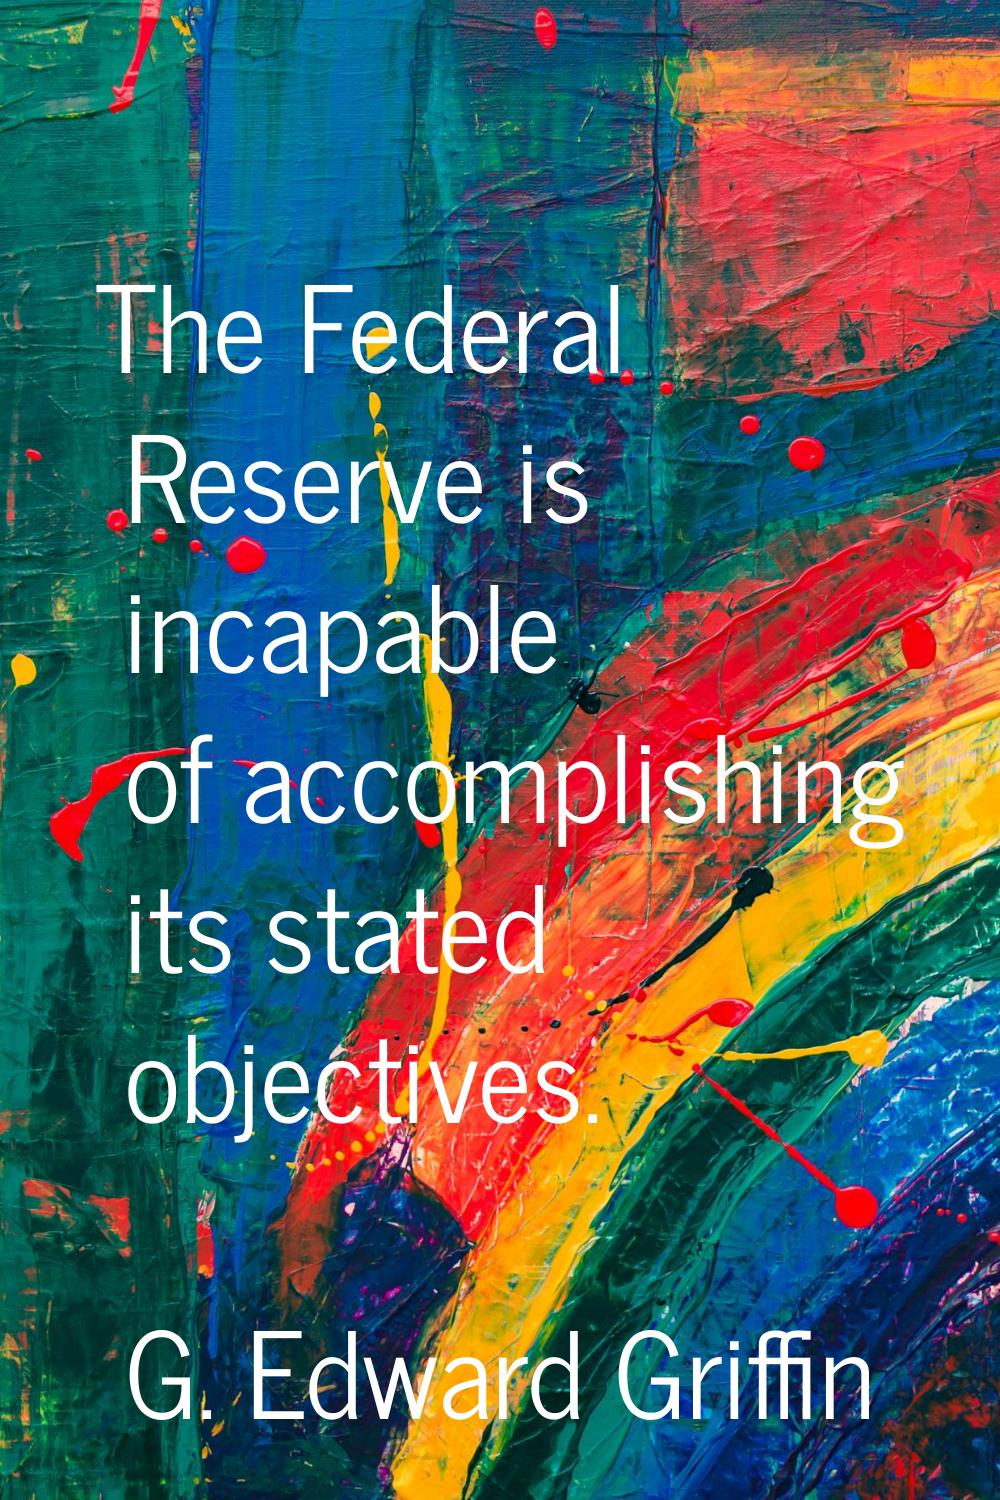 The Federal Reserve is incapable of accomplishing its stated objectives.